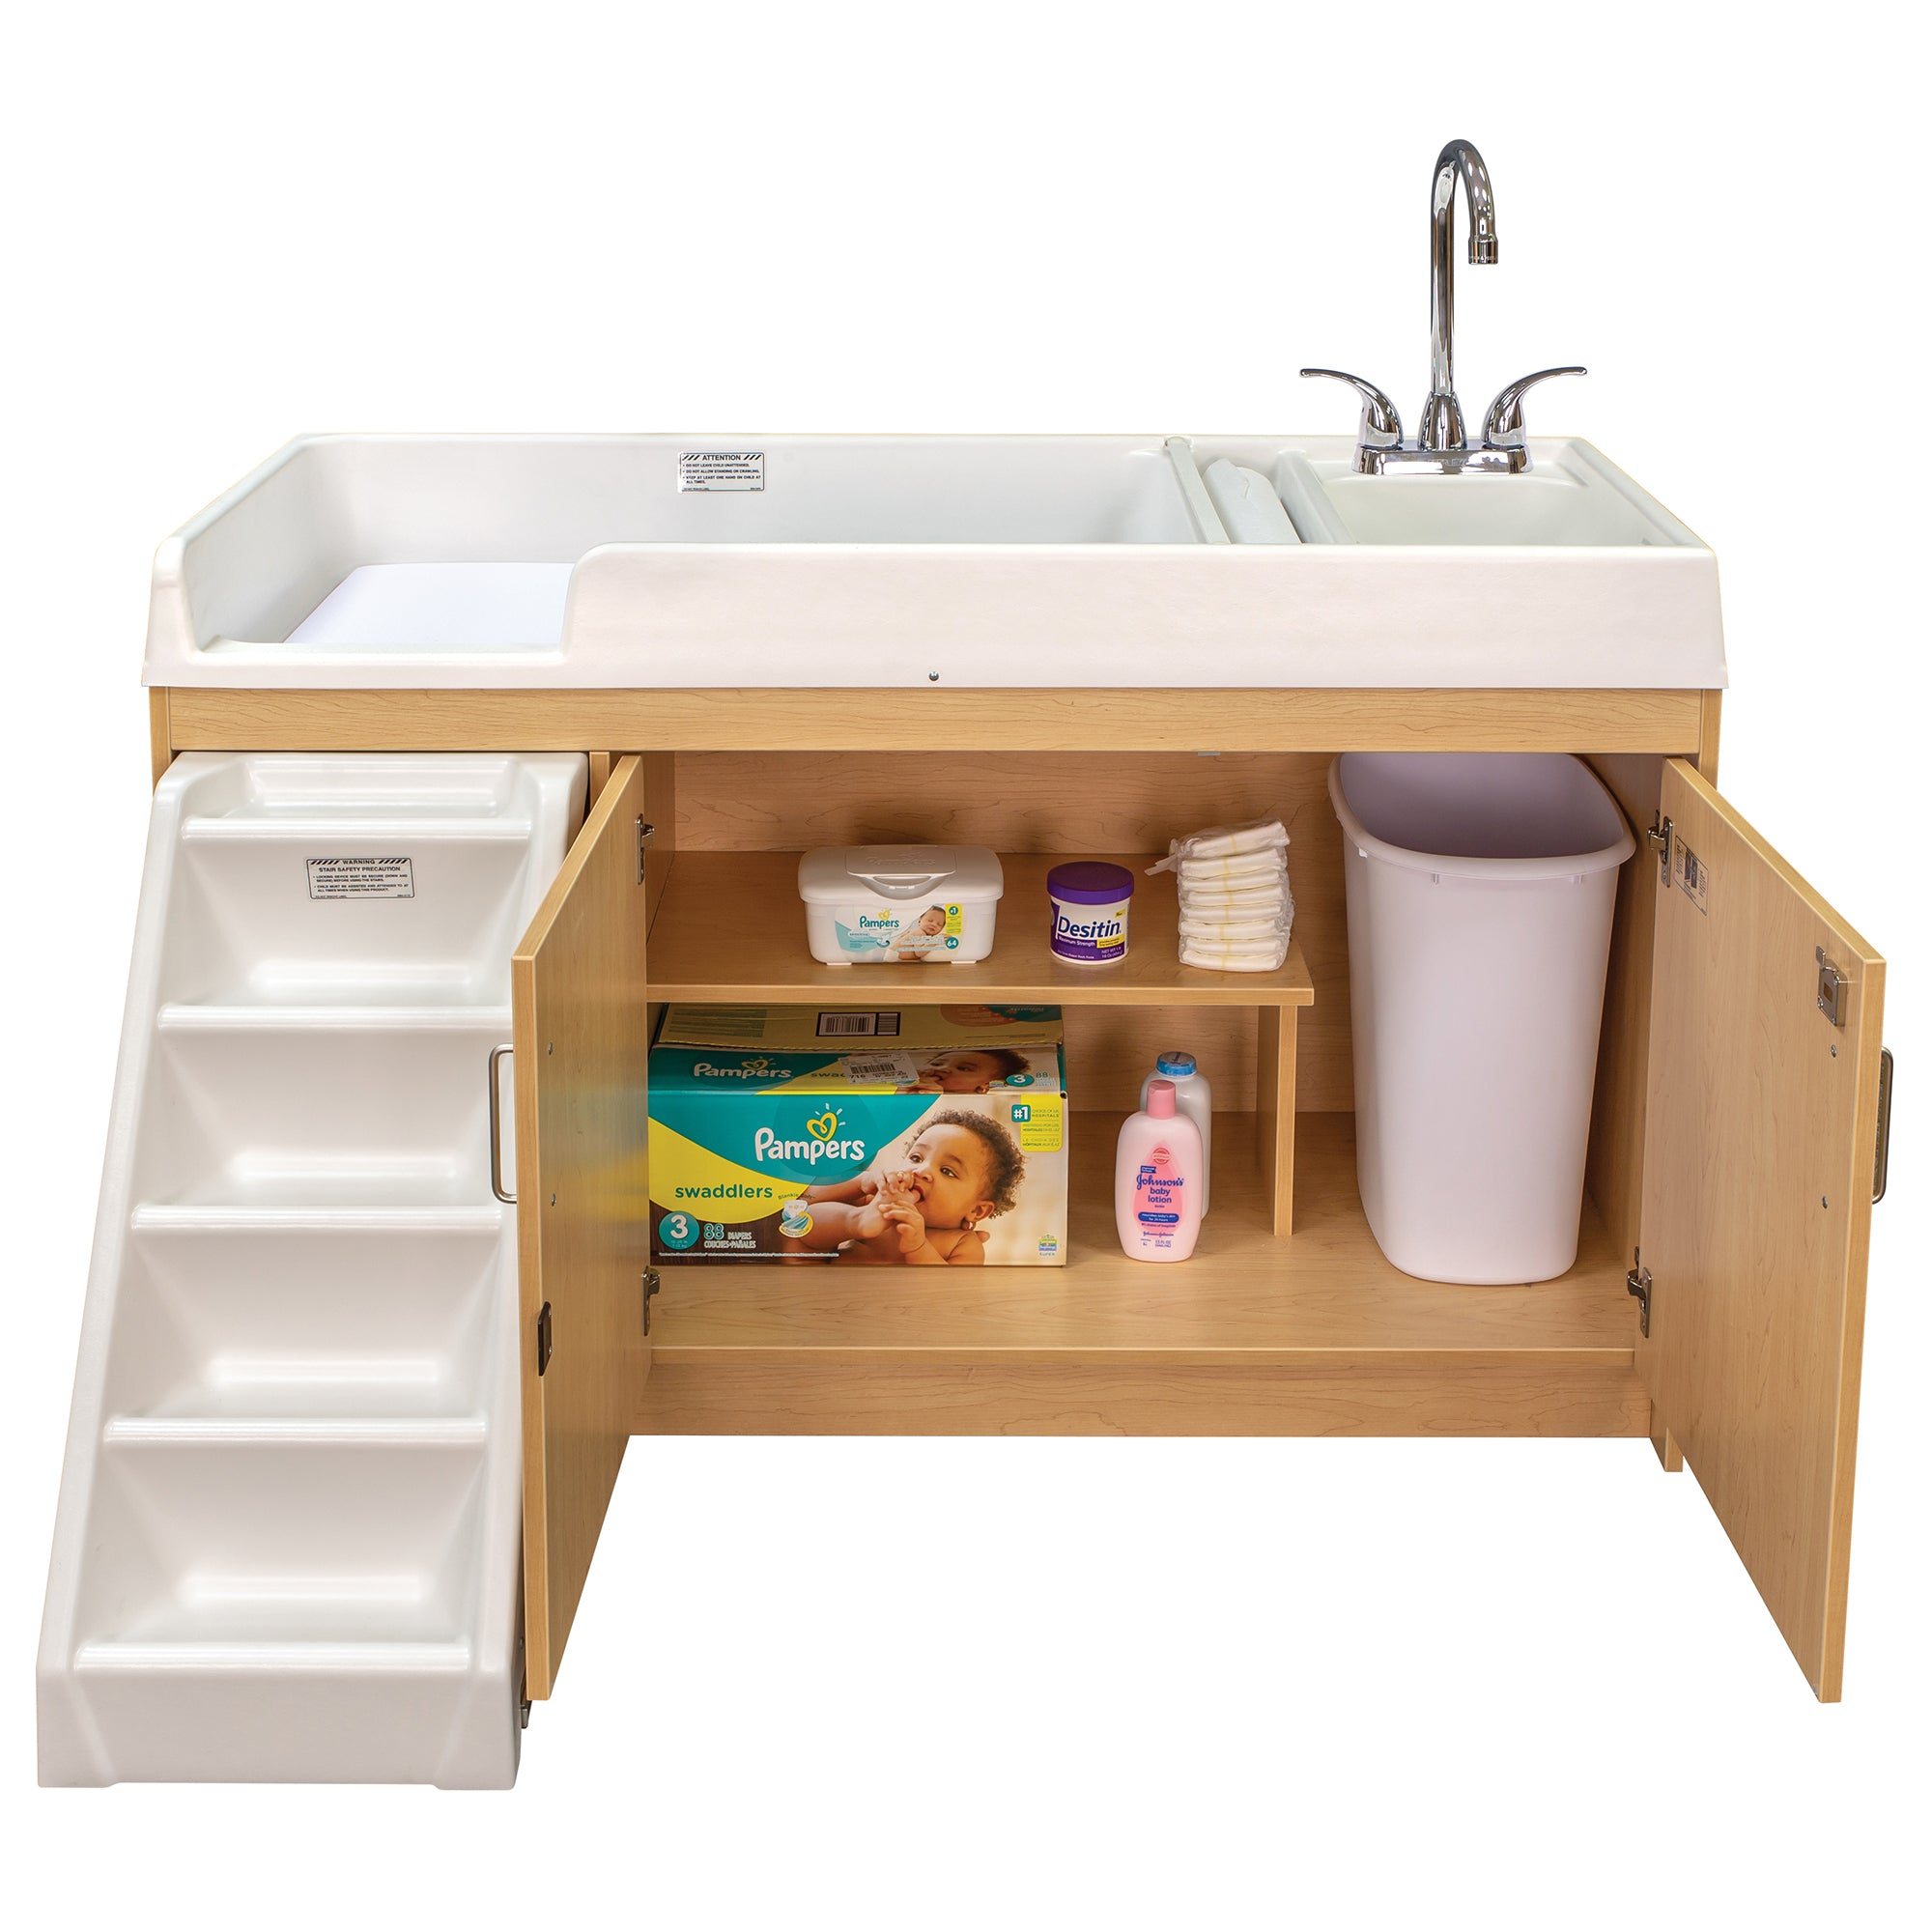 Toddler Walkup Changing Table with Sink 59-1/2" Wide